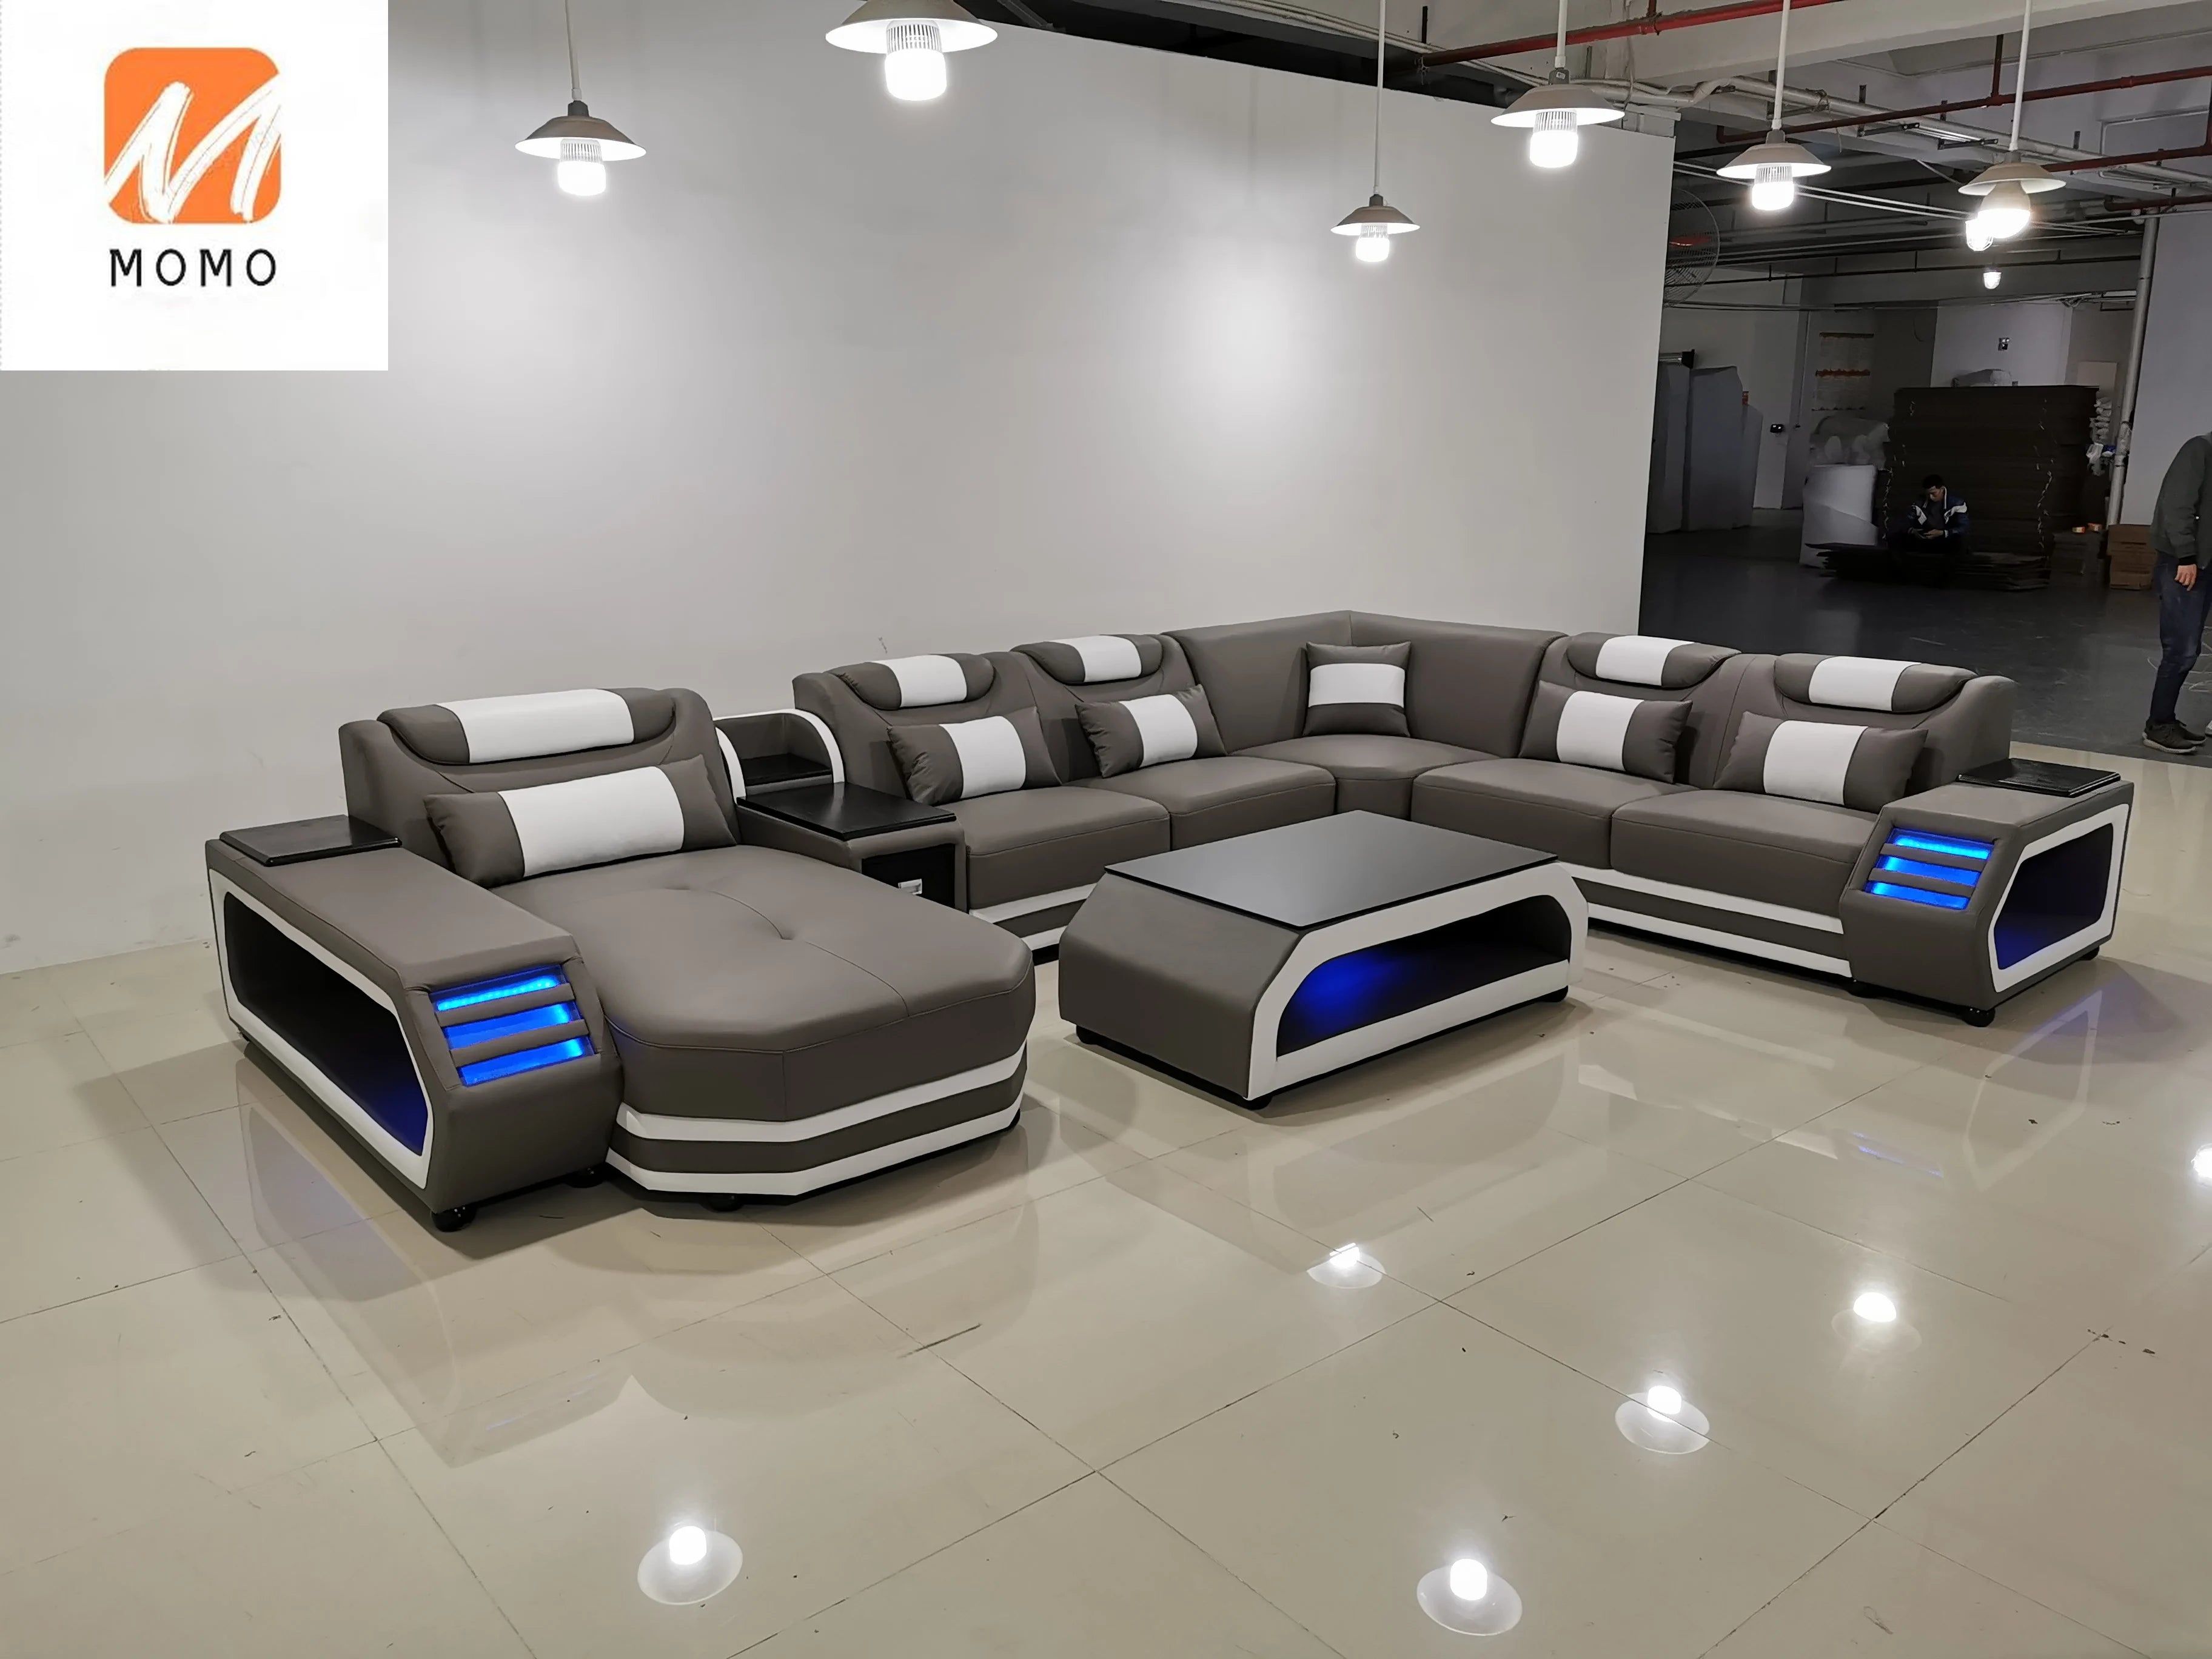 New arrival living room sofas super modern style living room furniture LED lamps top quality leather couch living room sofas